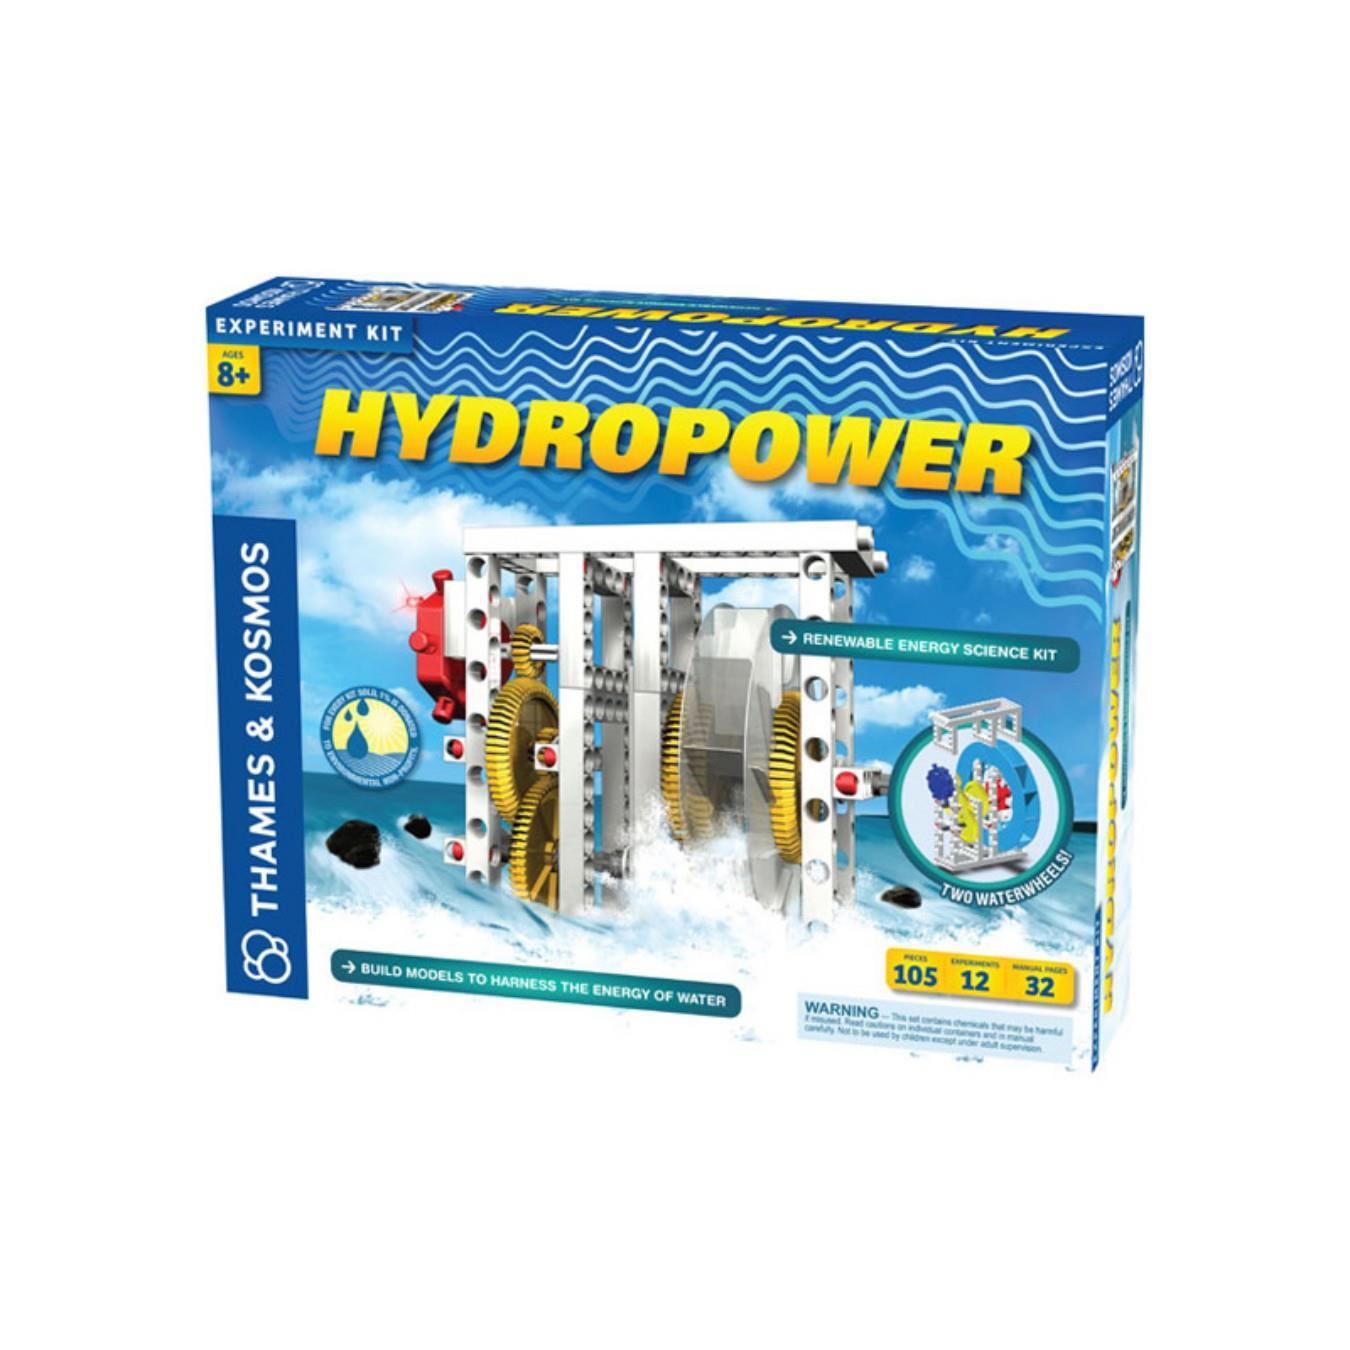 Thames & Kosmos Hydropower Experiment Kit - Click to Enlarge